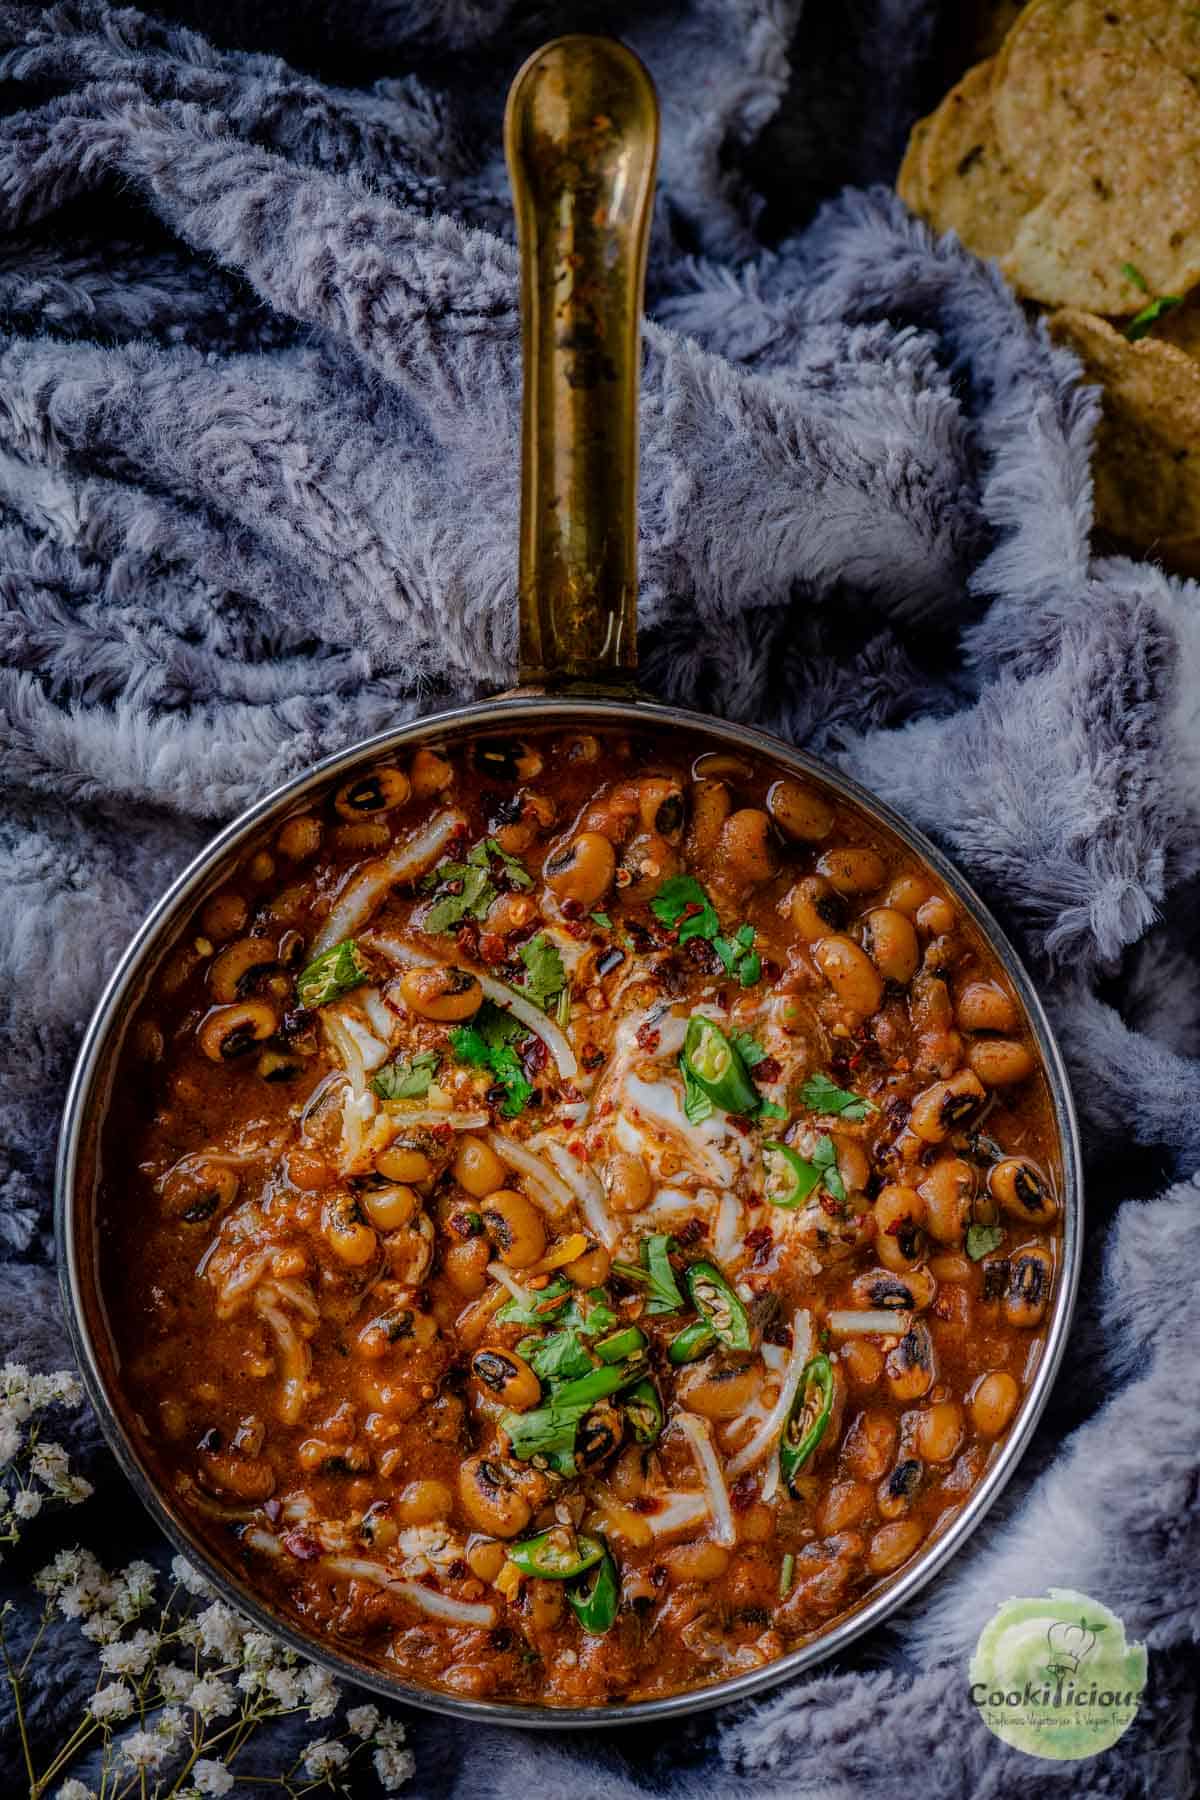 Instant Pot Black-Eyed Peas Vegan Chili served in a round platter